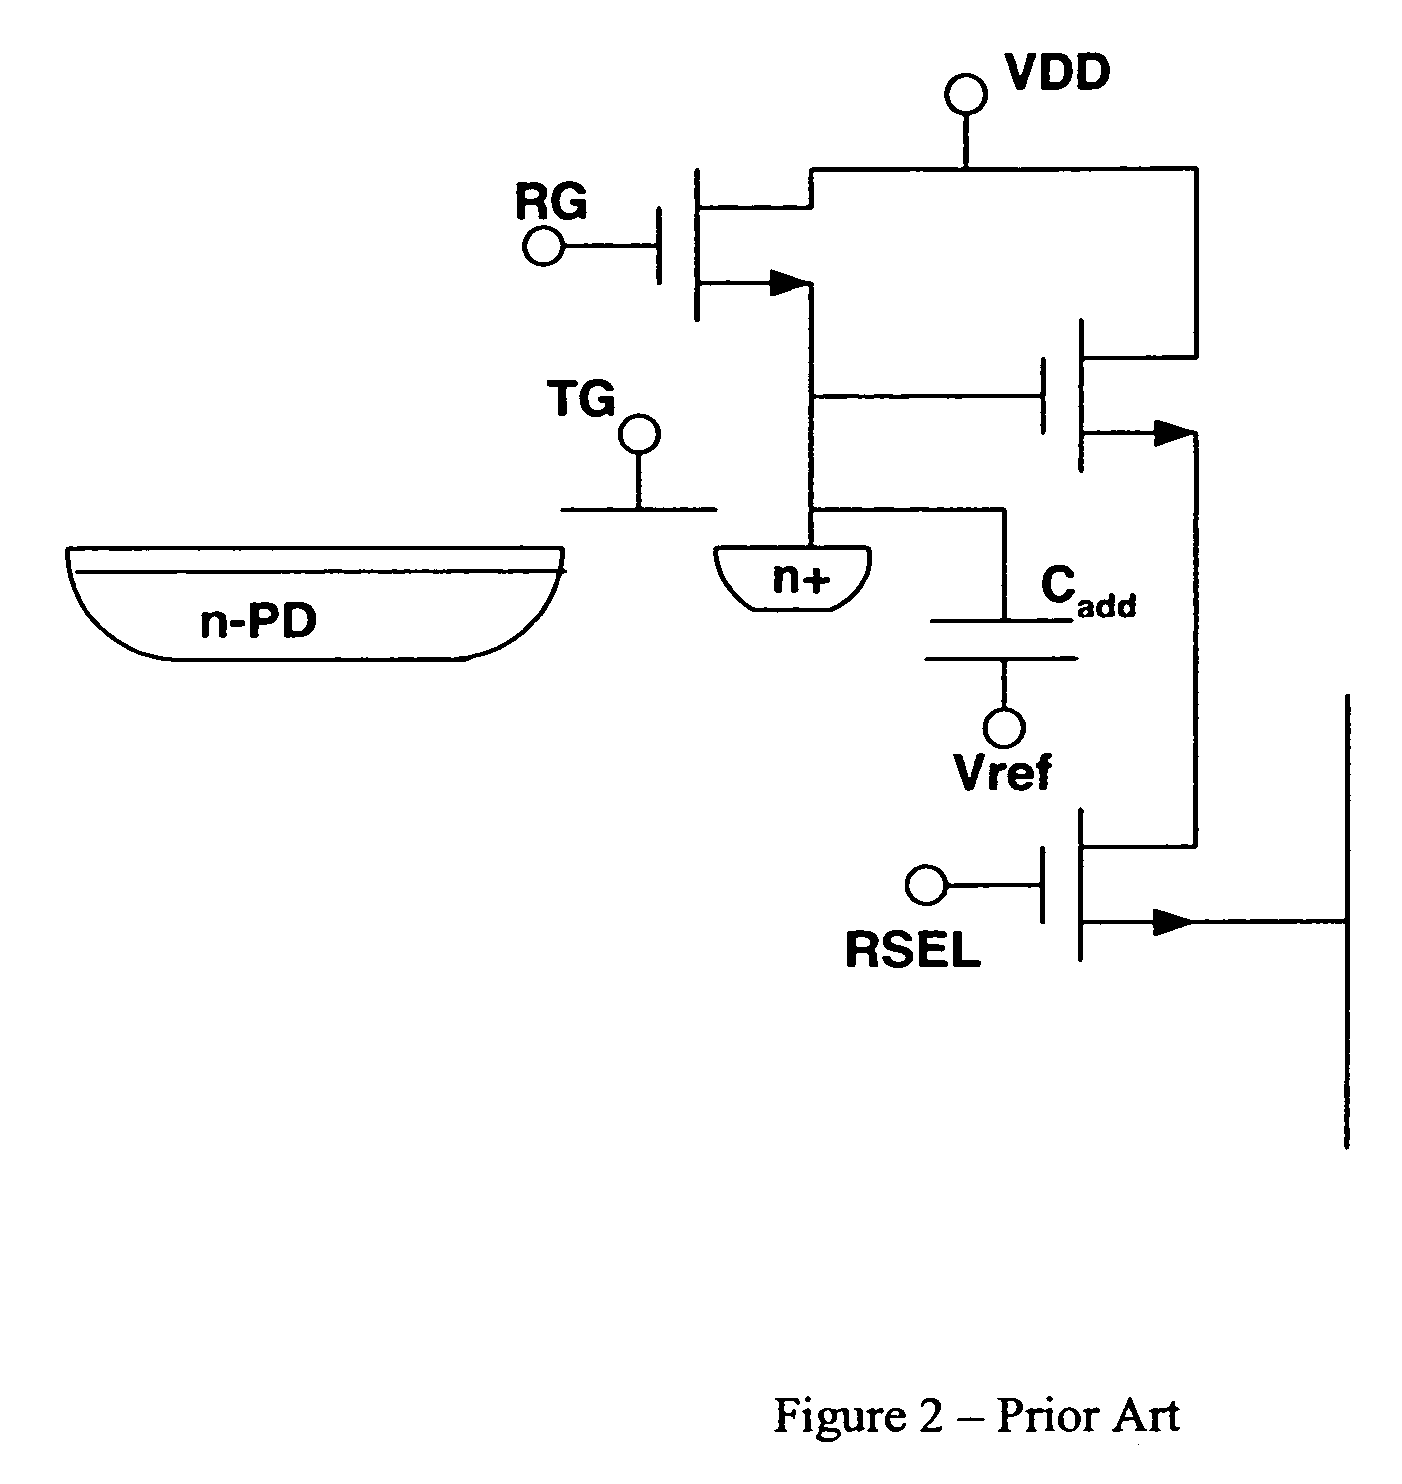 CMOS image sensor pixel with selectable binning and conversion gain